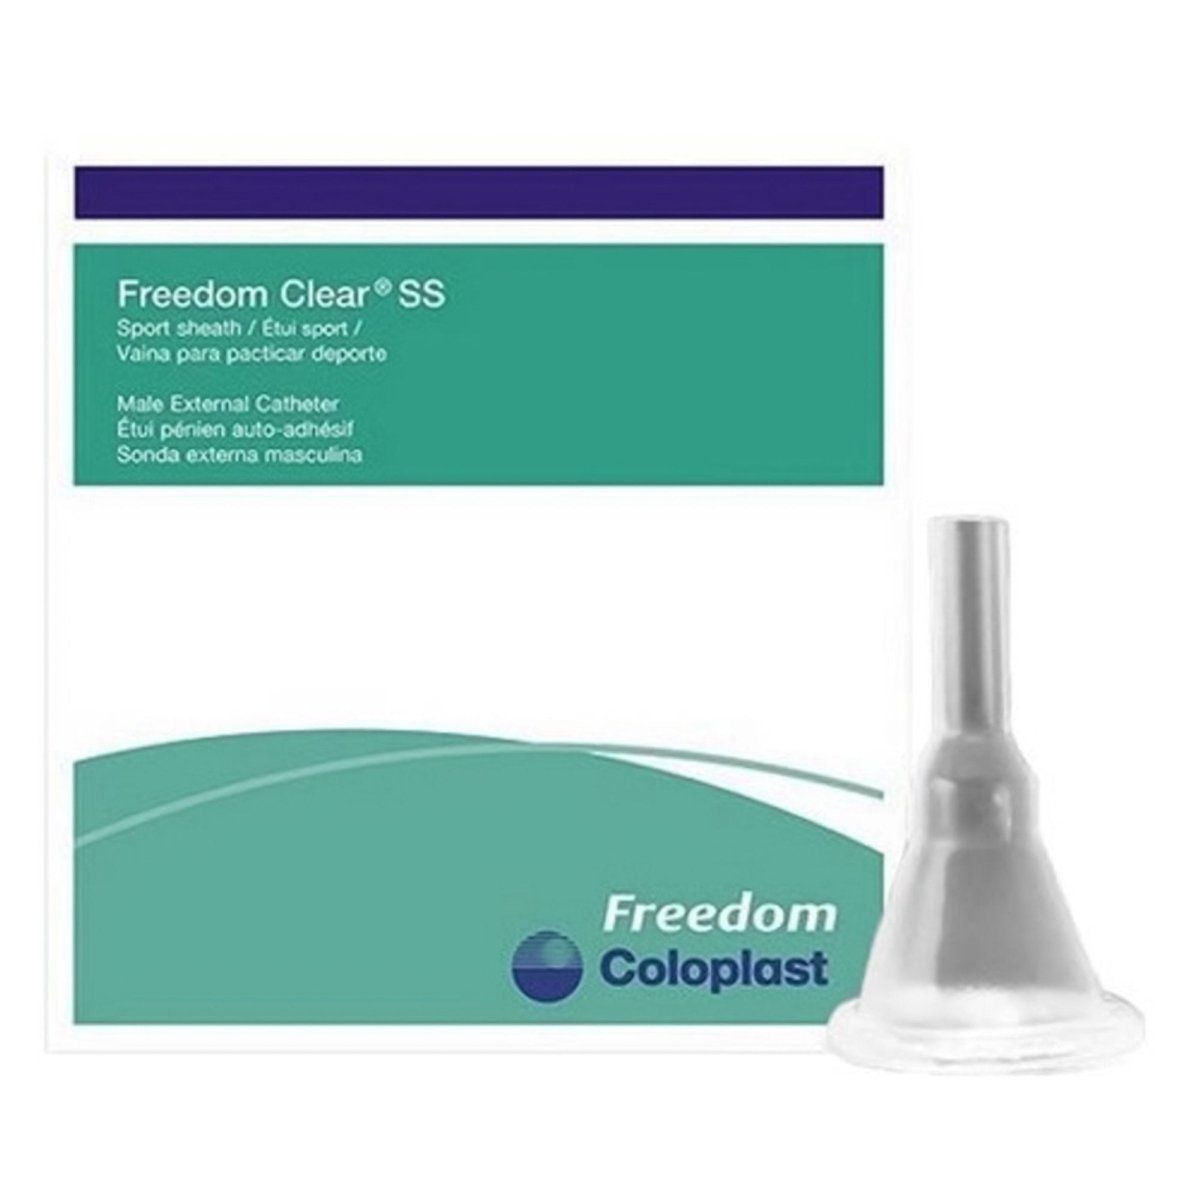 Coloplast Freedom Clear Ss Male External Catheter - 461687_BX - 2